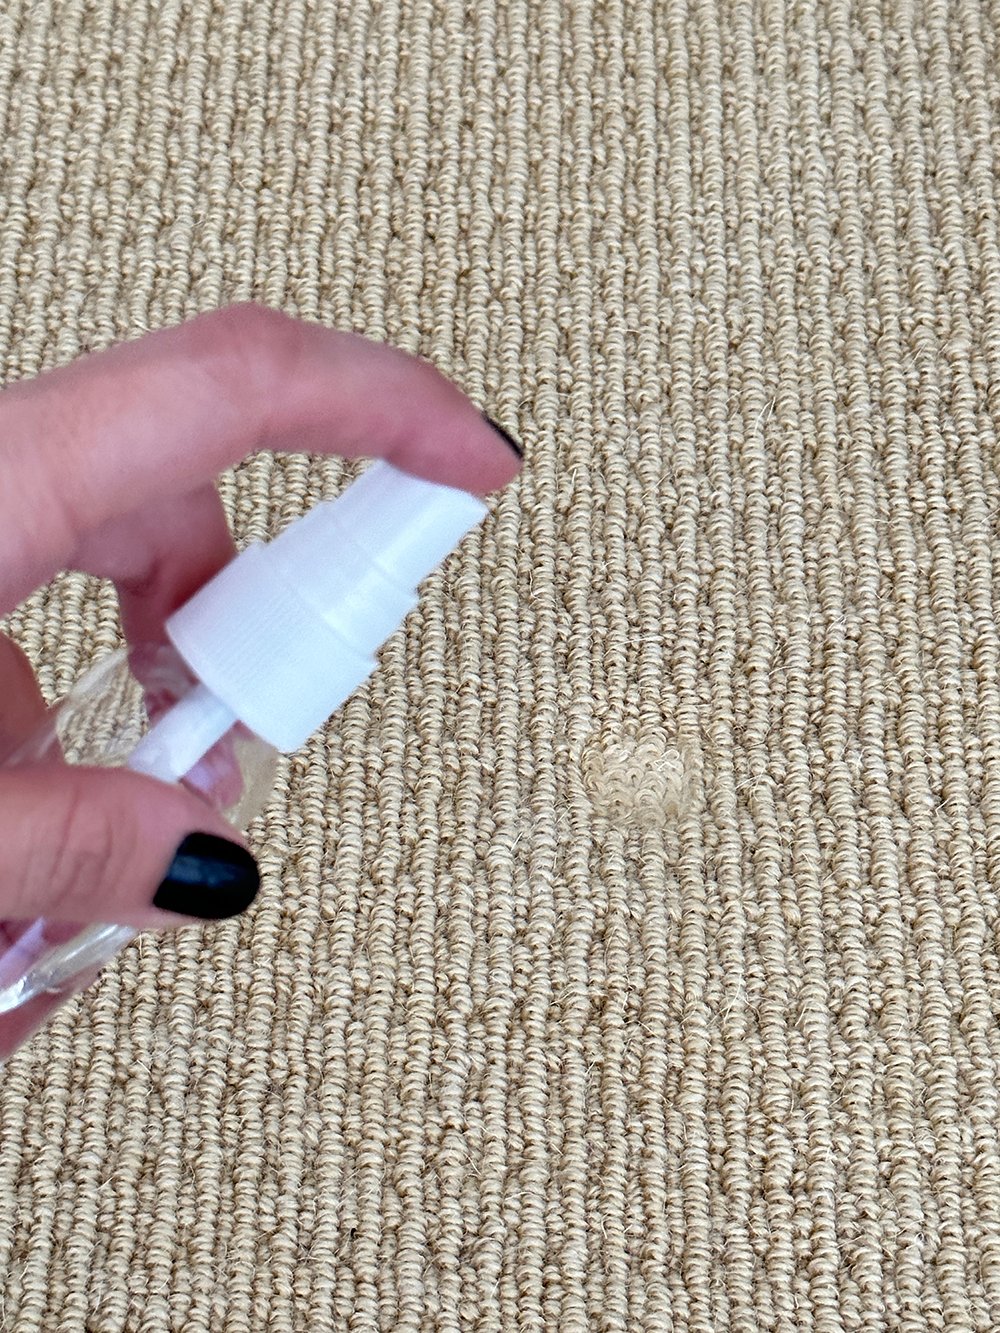 How to Remove Furniture Indentations from Carpet - roomfortuesday.com